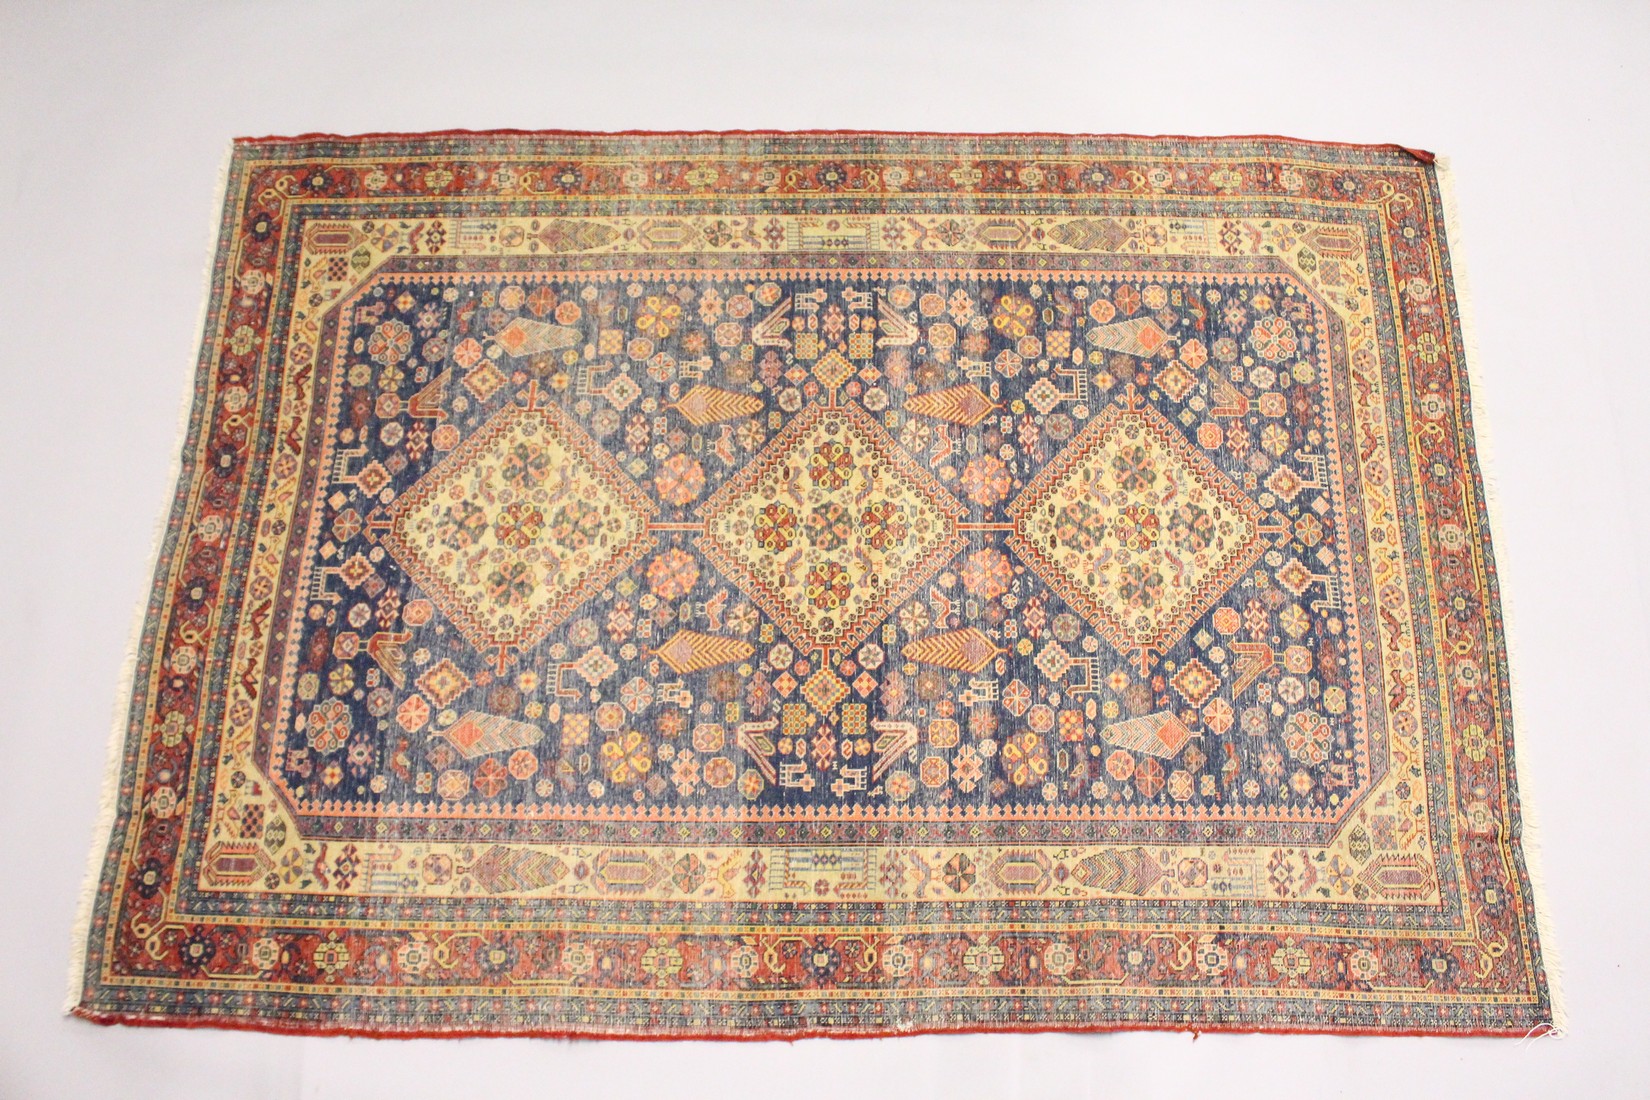 A PERSIAN QUASHQI CARPET, dark blue ground with three central diamond shaped medallions stylised - Image 2 of 2